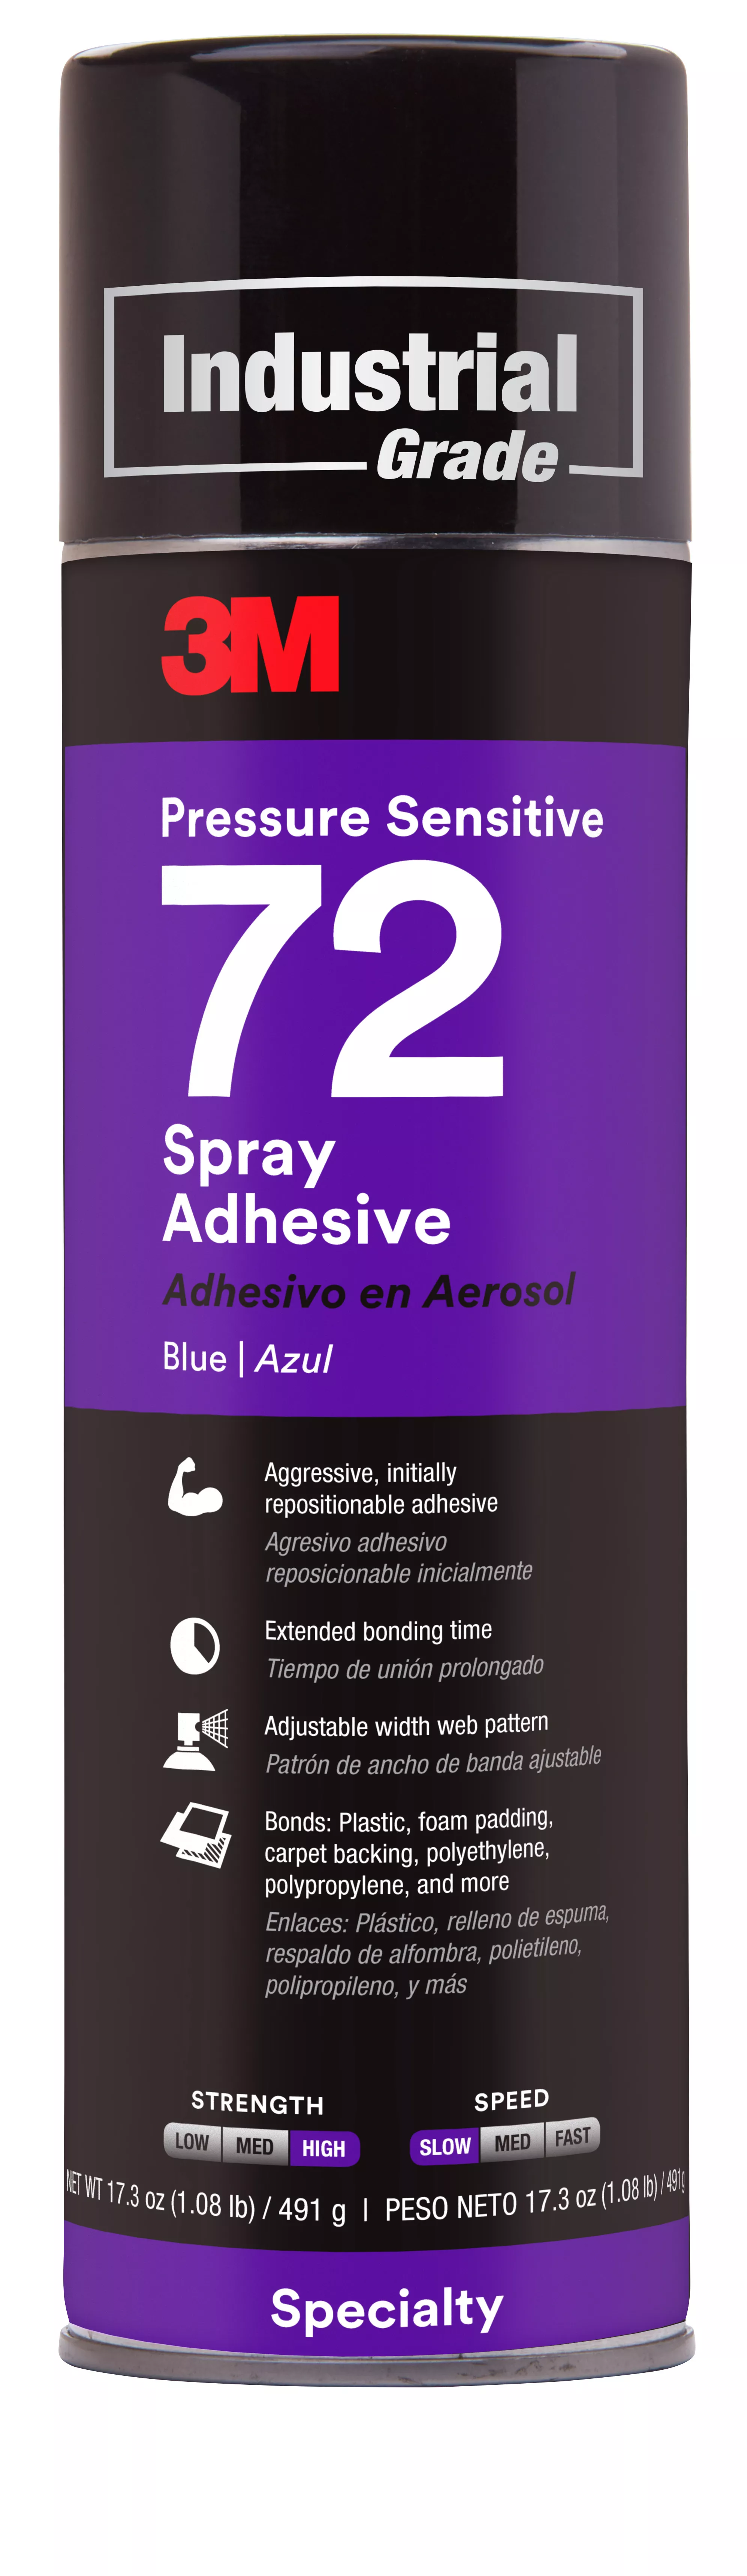 3M™ Pressure Sensitive Spray Adhesive 72, Blue, 24 fl oz Can (Net Wt
17.3 oz), 12/Case, NOT FOR SALE IN CA AND OTHER STATES